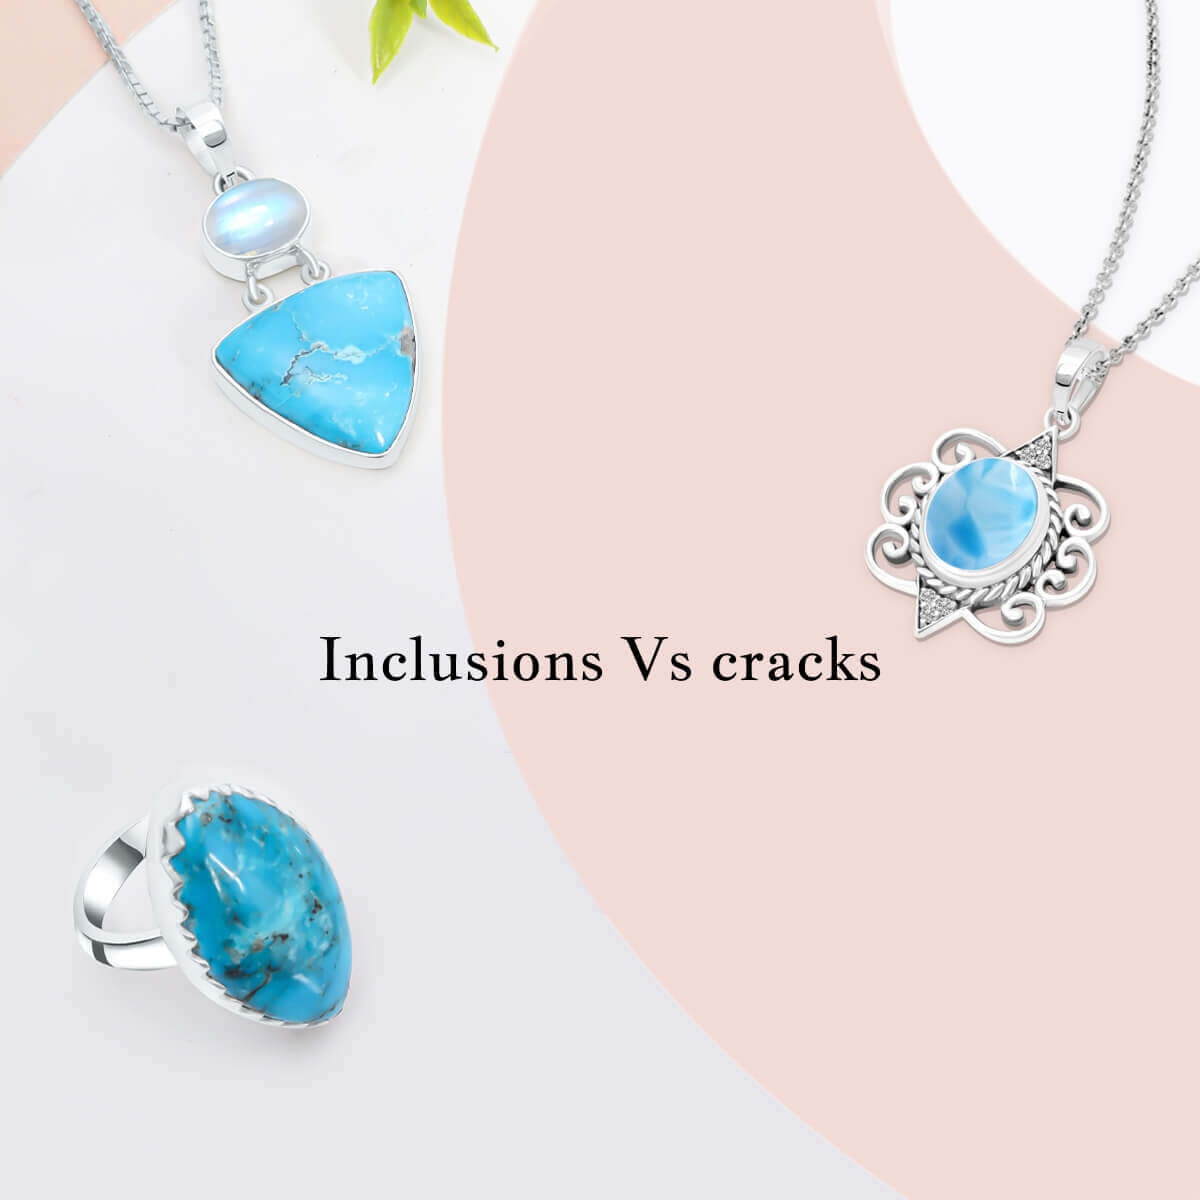 differences between Inclusions and cracks